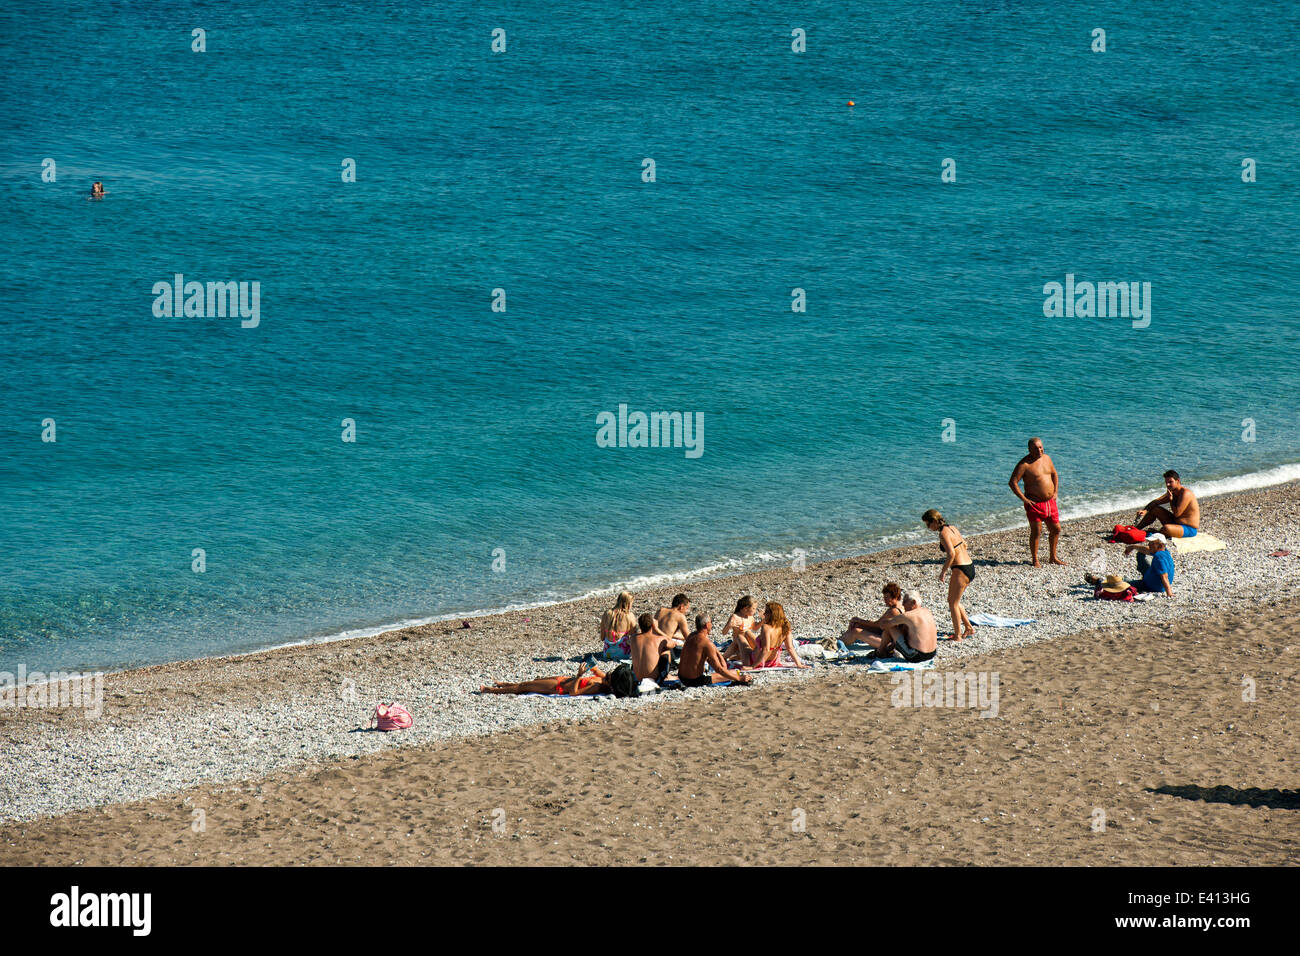 Elli High Resolution Stock Photography and Images - Alamy